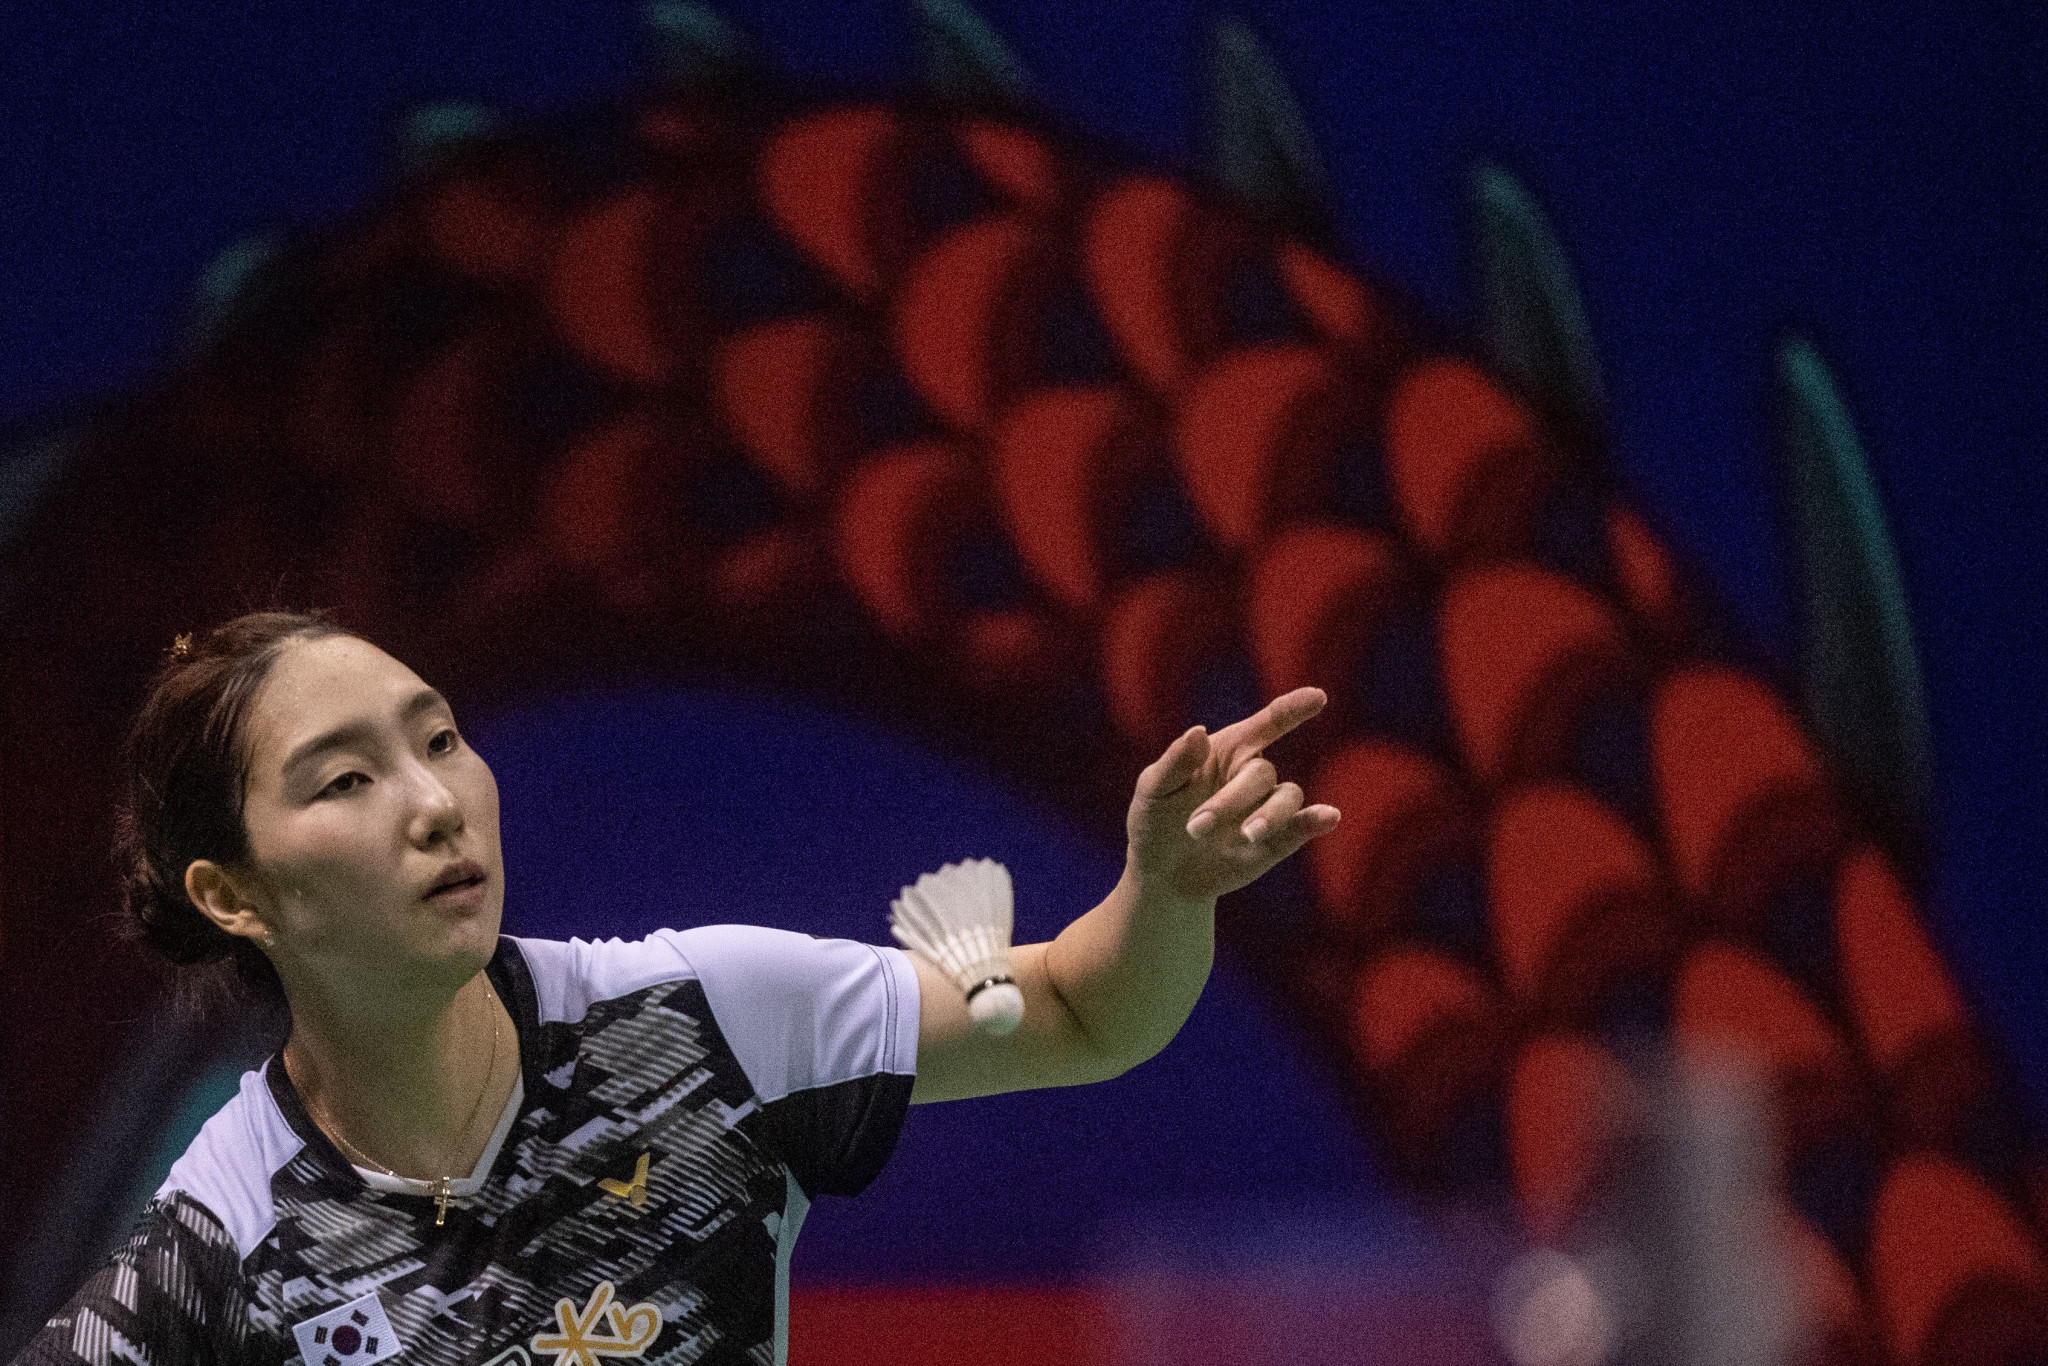 South Korea's Sung Ji Hyun is bidding for a fourth women's singles title at the event ©Getty Images